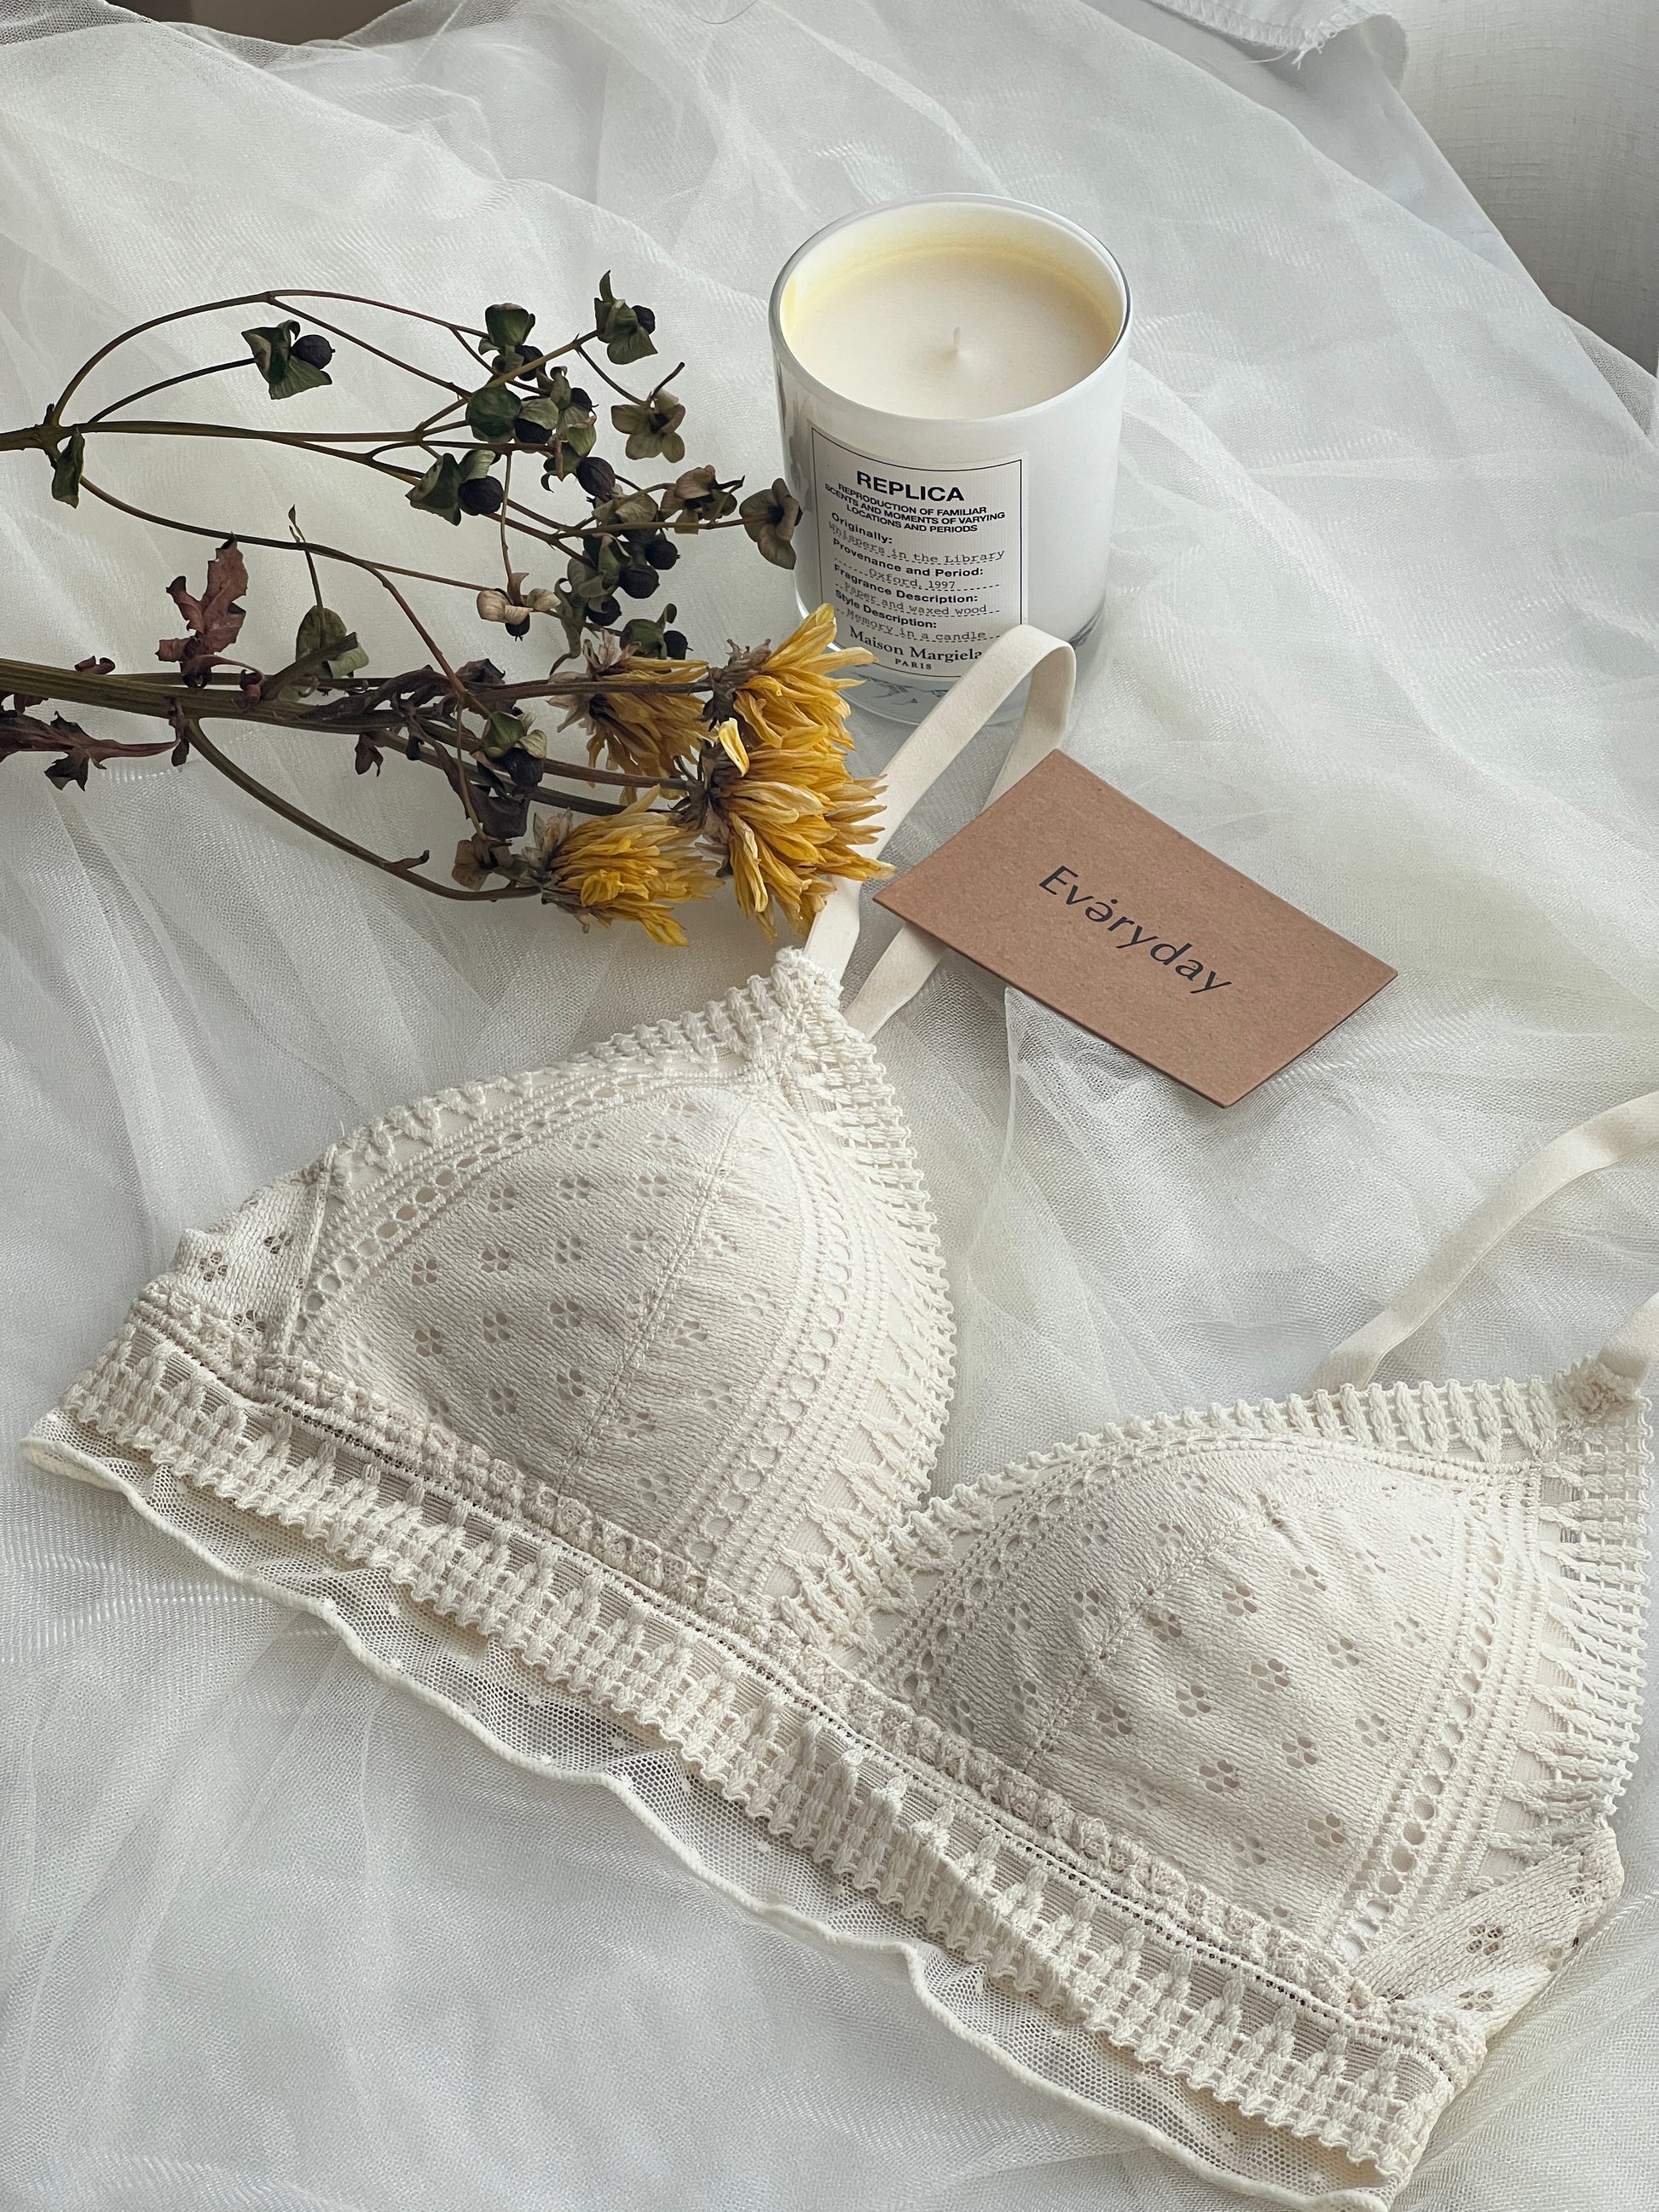 Four Leaf Clover Lace Bralette – Everyday innerwear Boutique